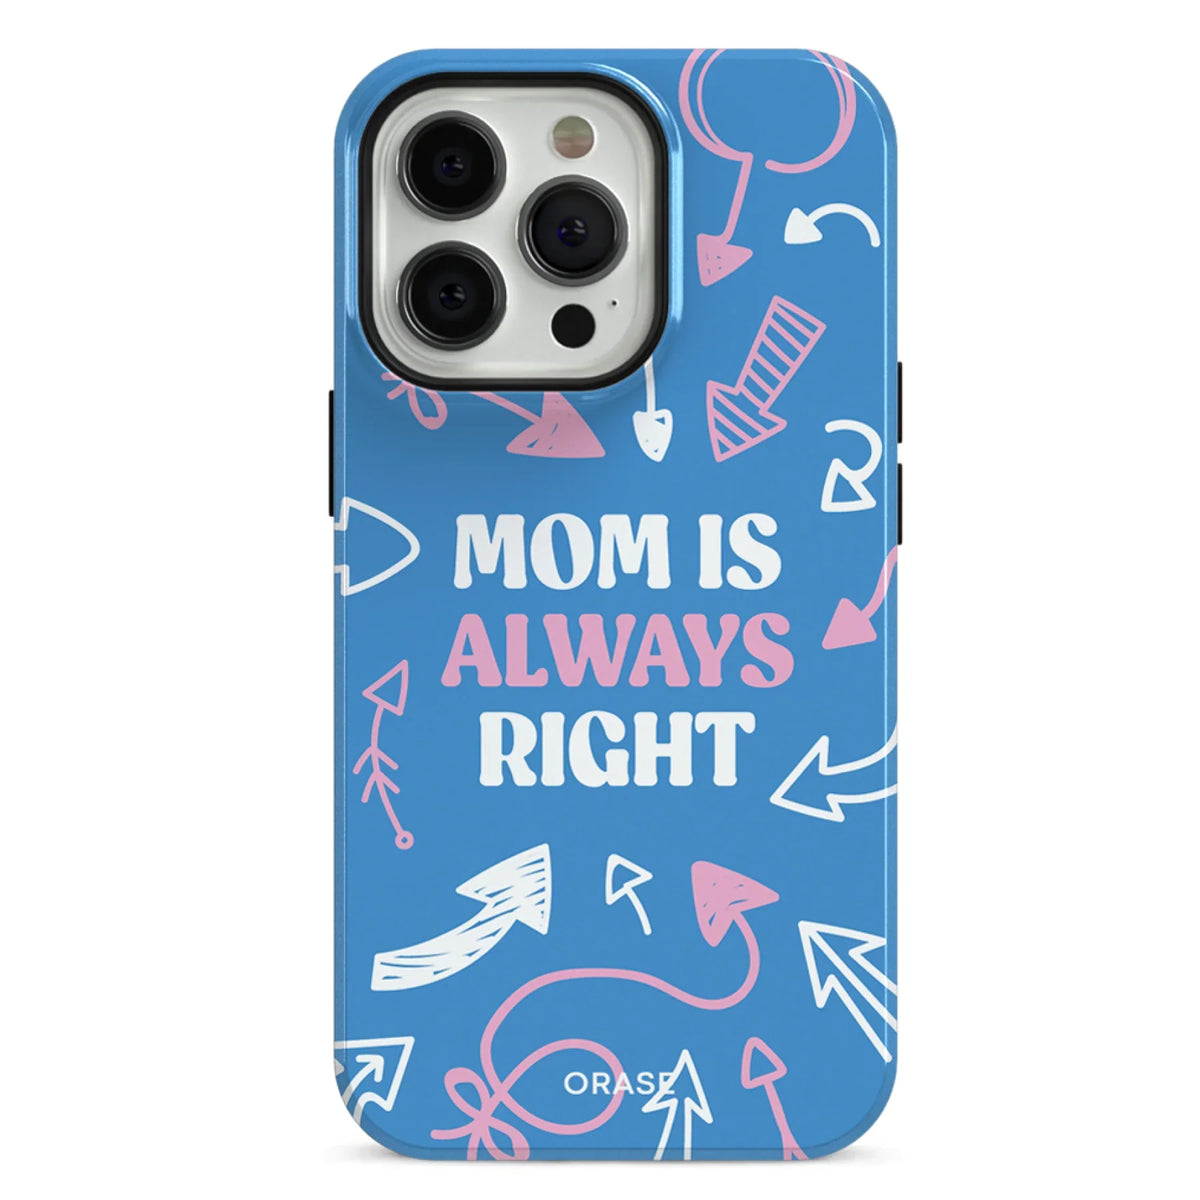 Mom Is Always Right iPhone Case - iPhone 12 Pro Max